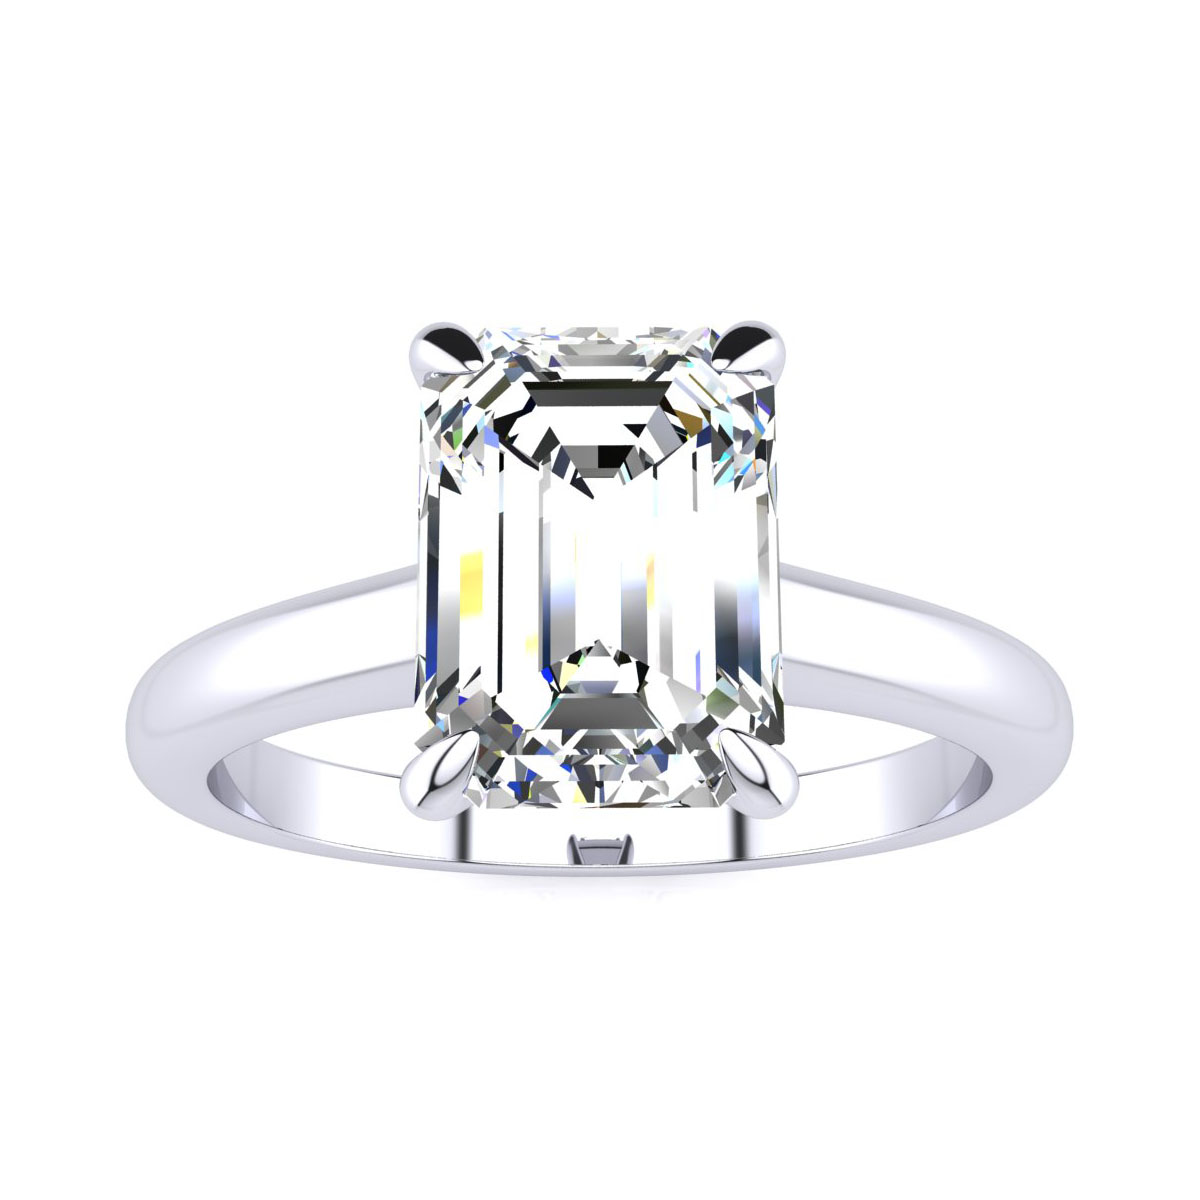 Details about   Best 2.CT Emerald Cut Near White Moissanite 14k White Gold Fn Engagement Ring